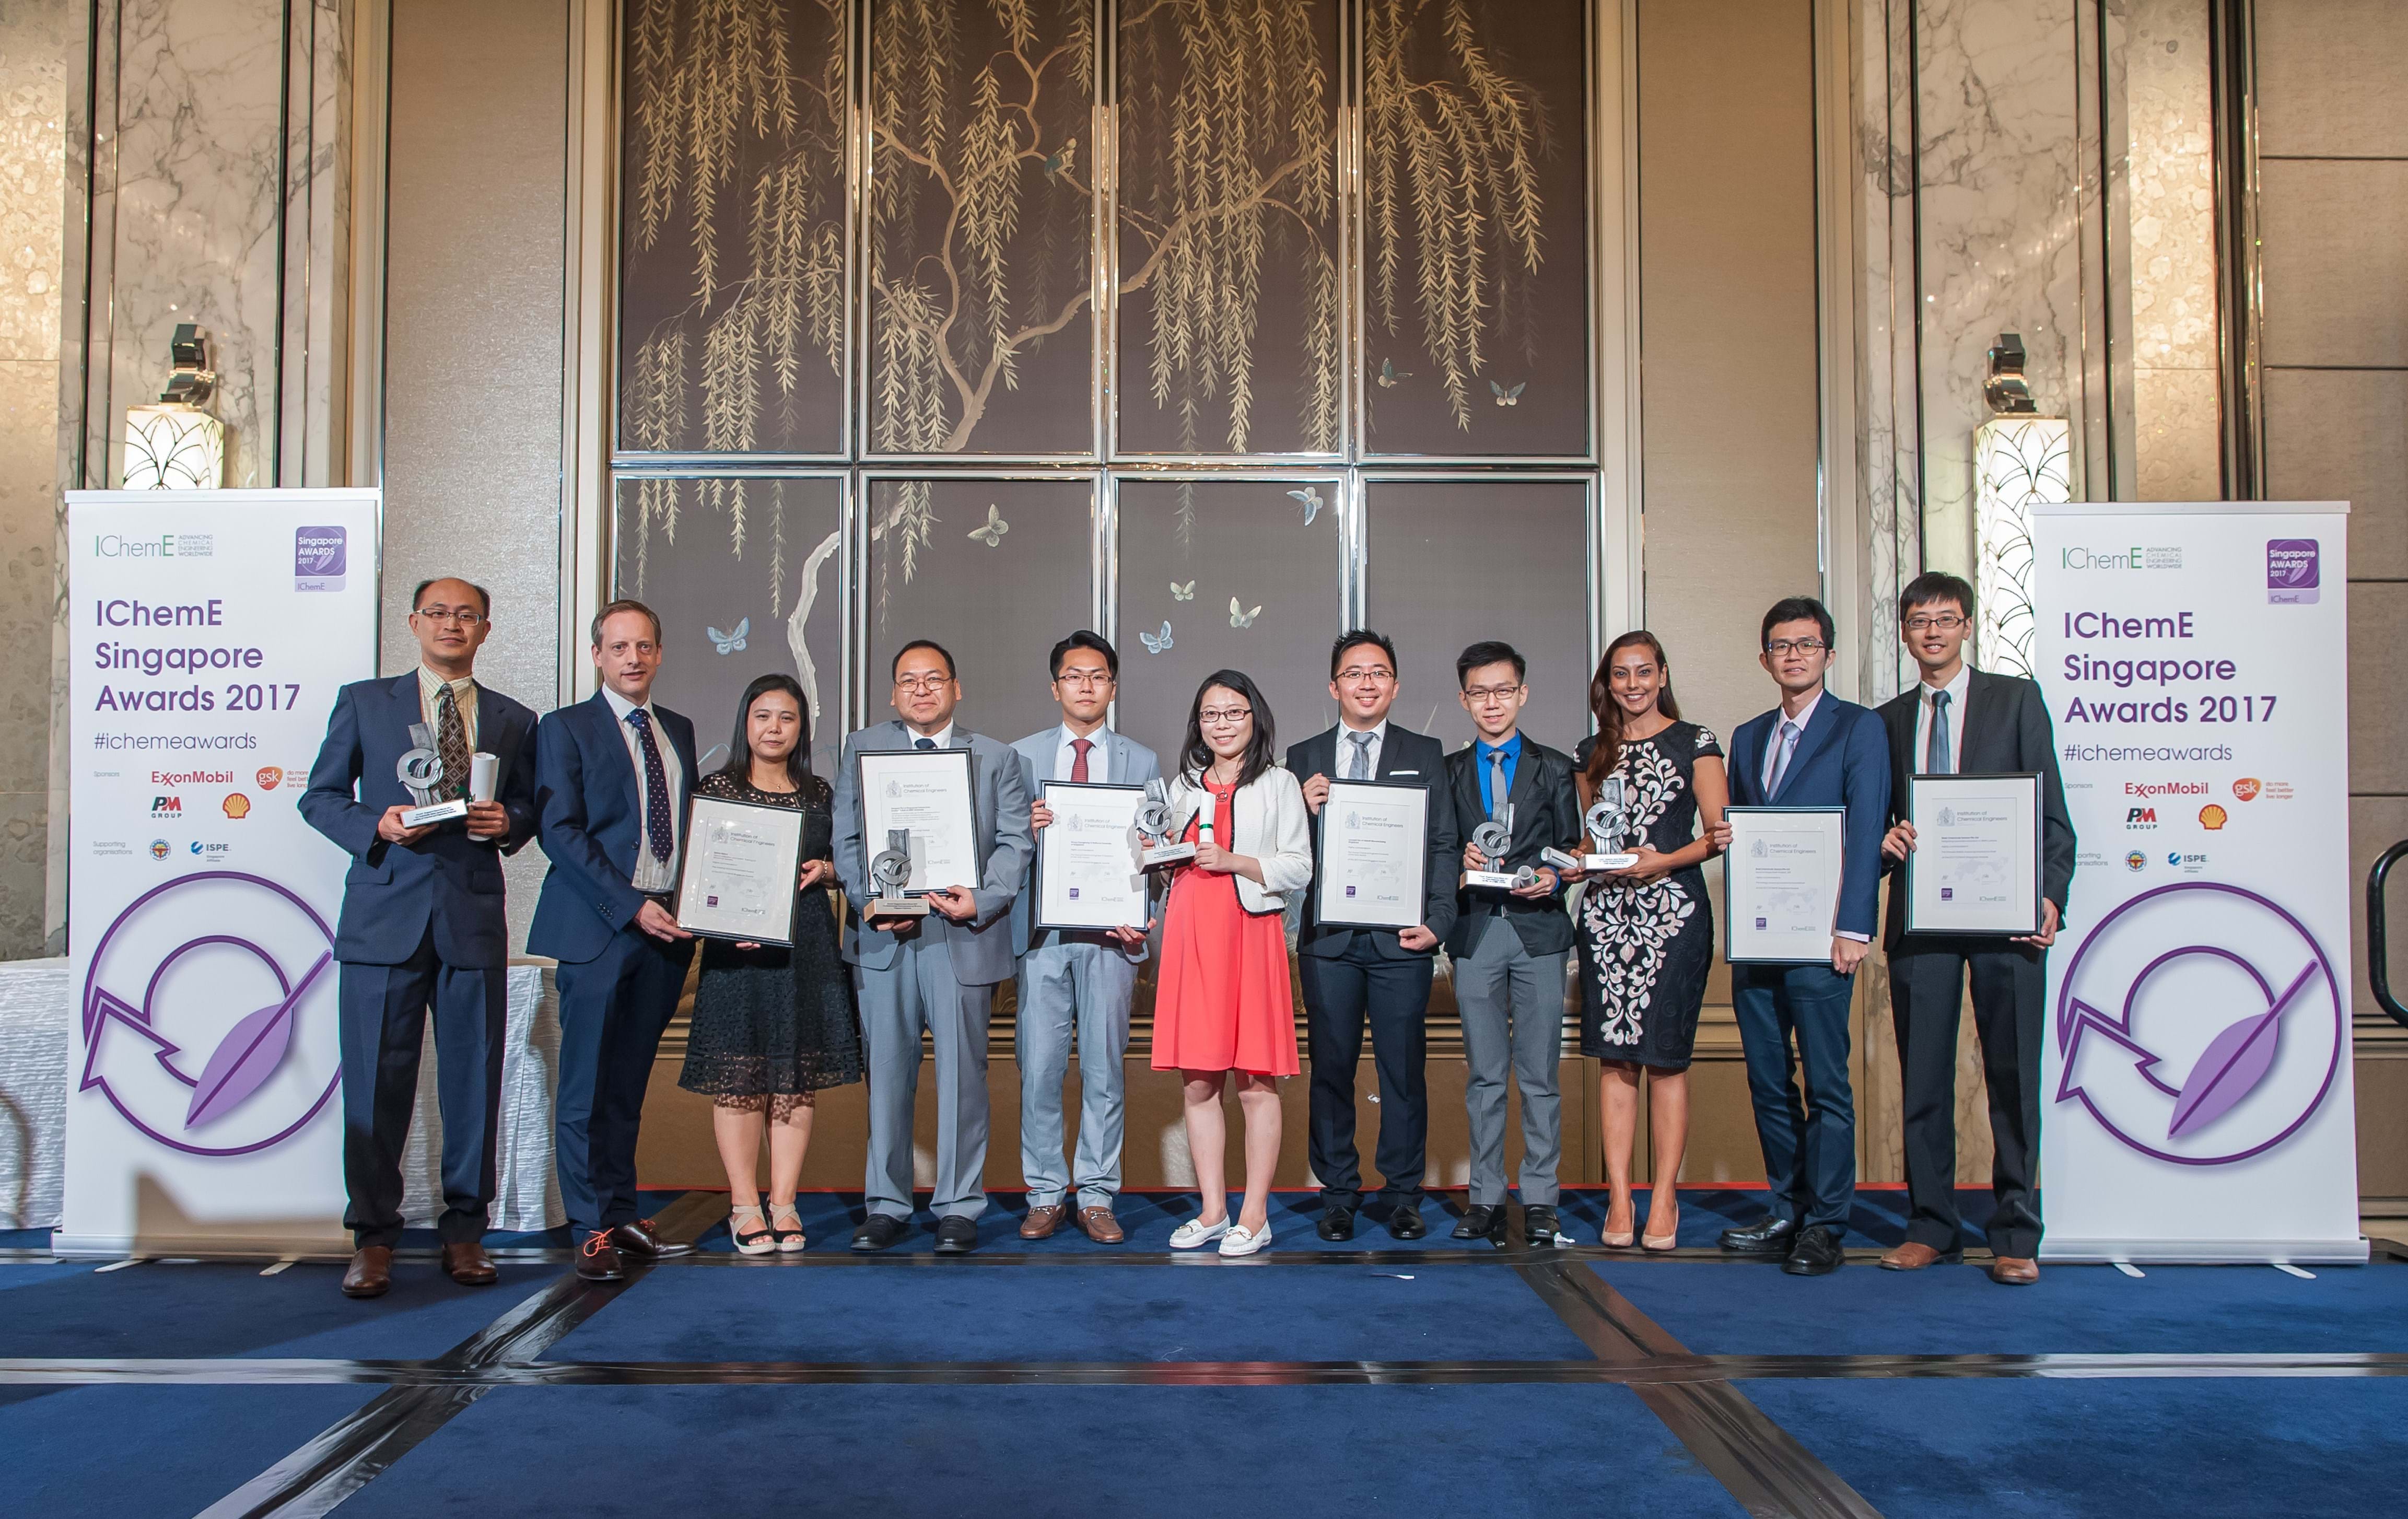 Winners announced at eighth IChemE Singapore Awards - News - The ...